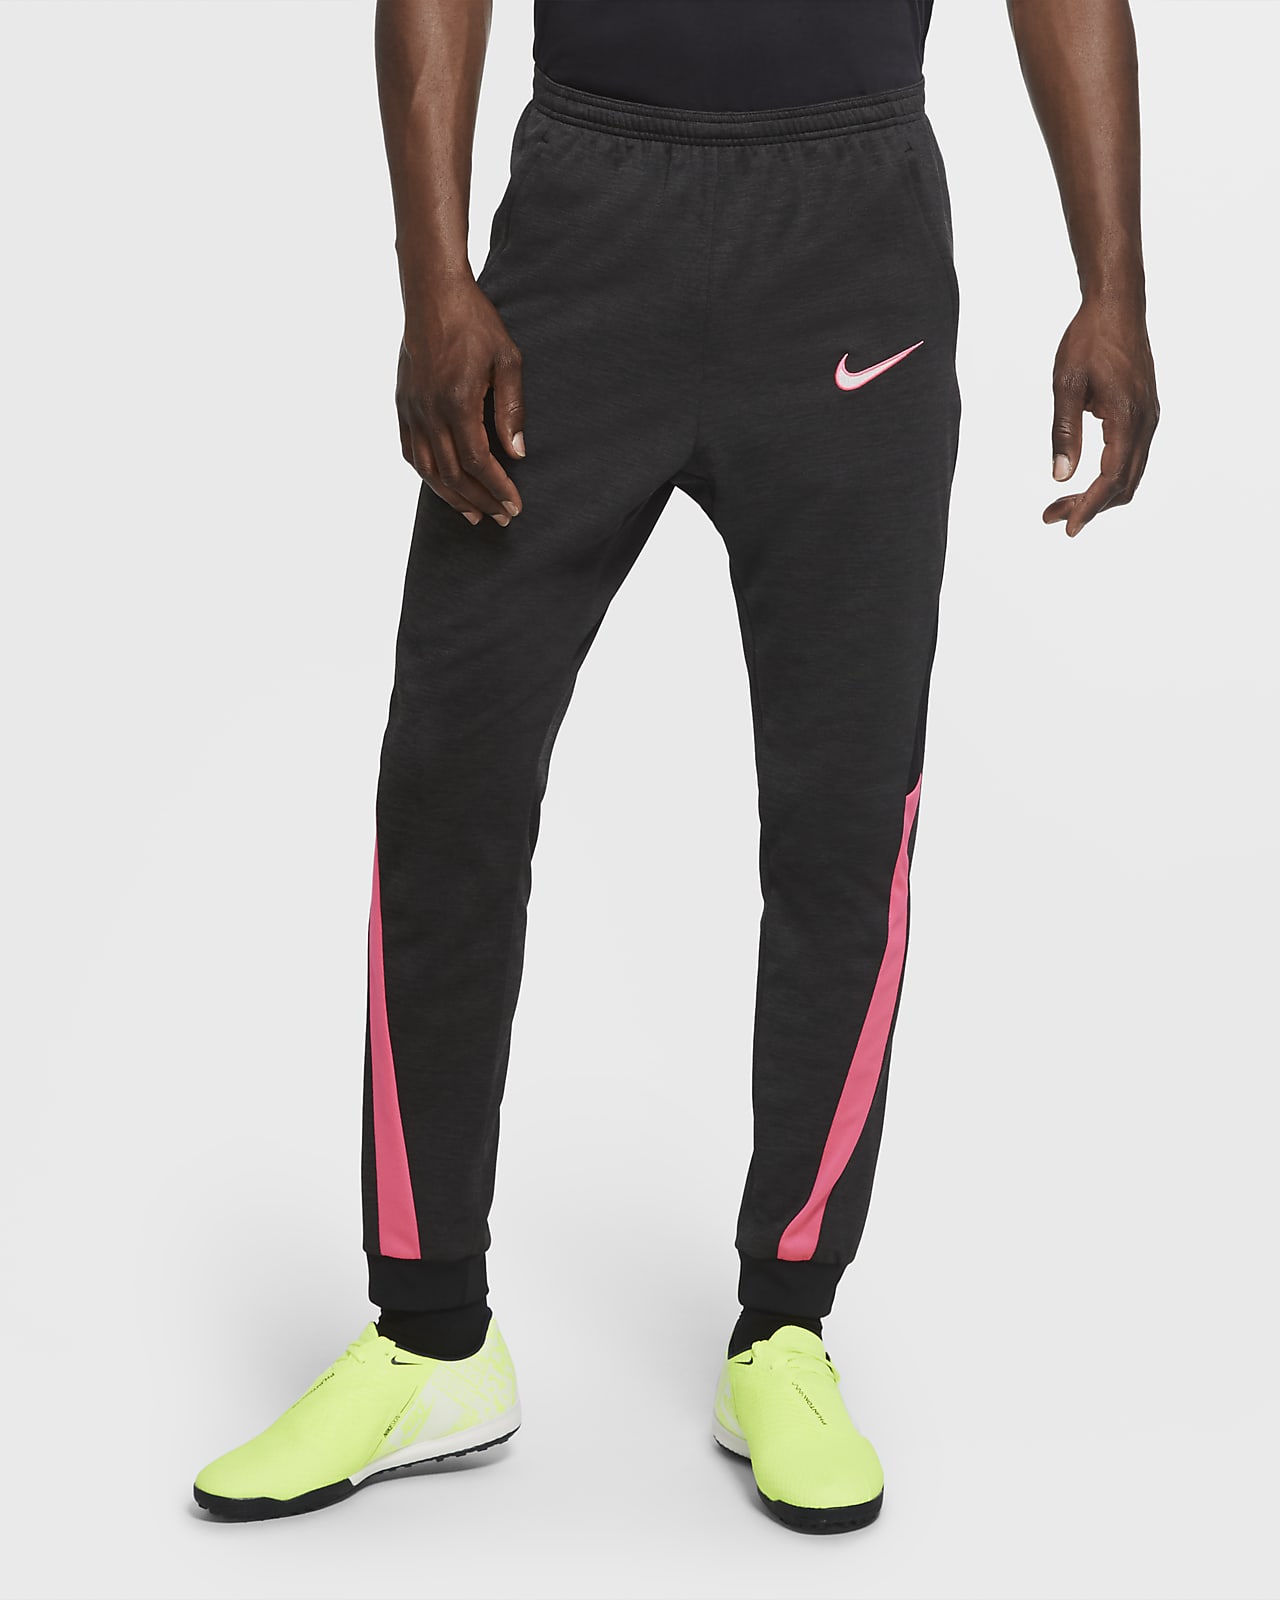 Nike ISPA applies its technical lens to a new hybrid pant  Acquire